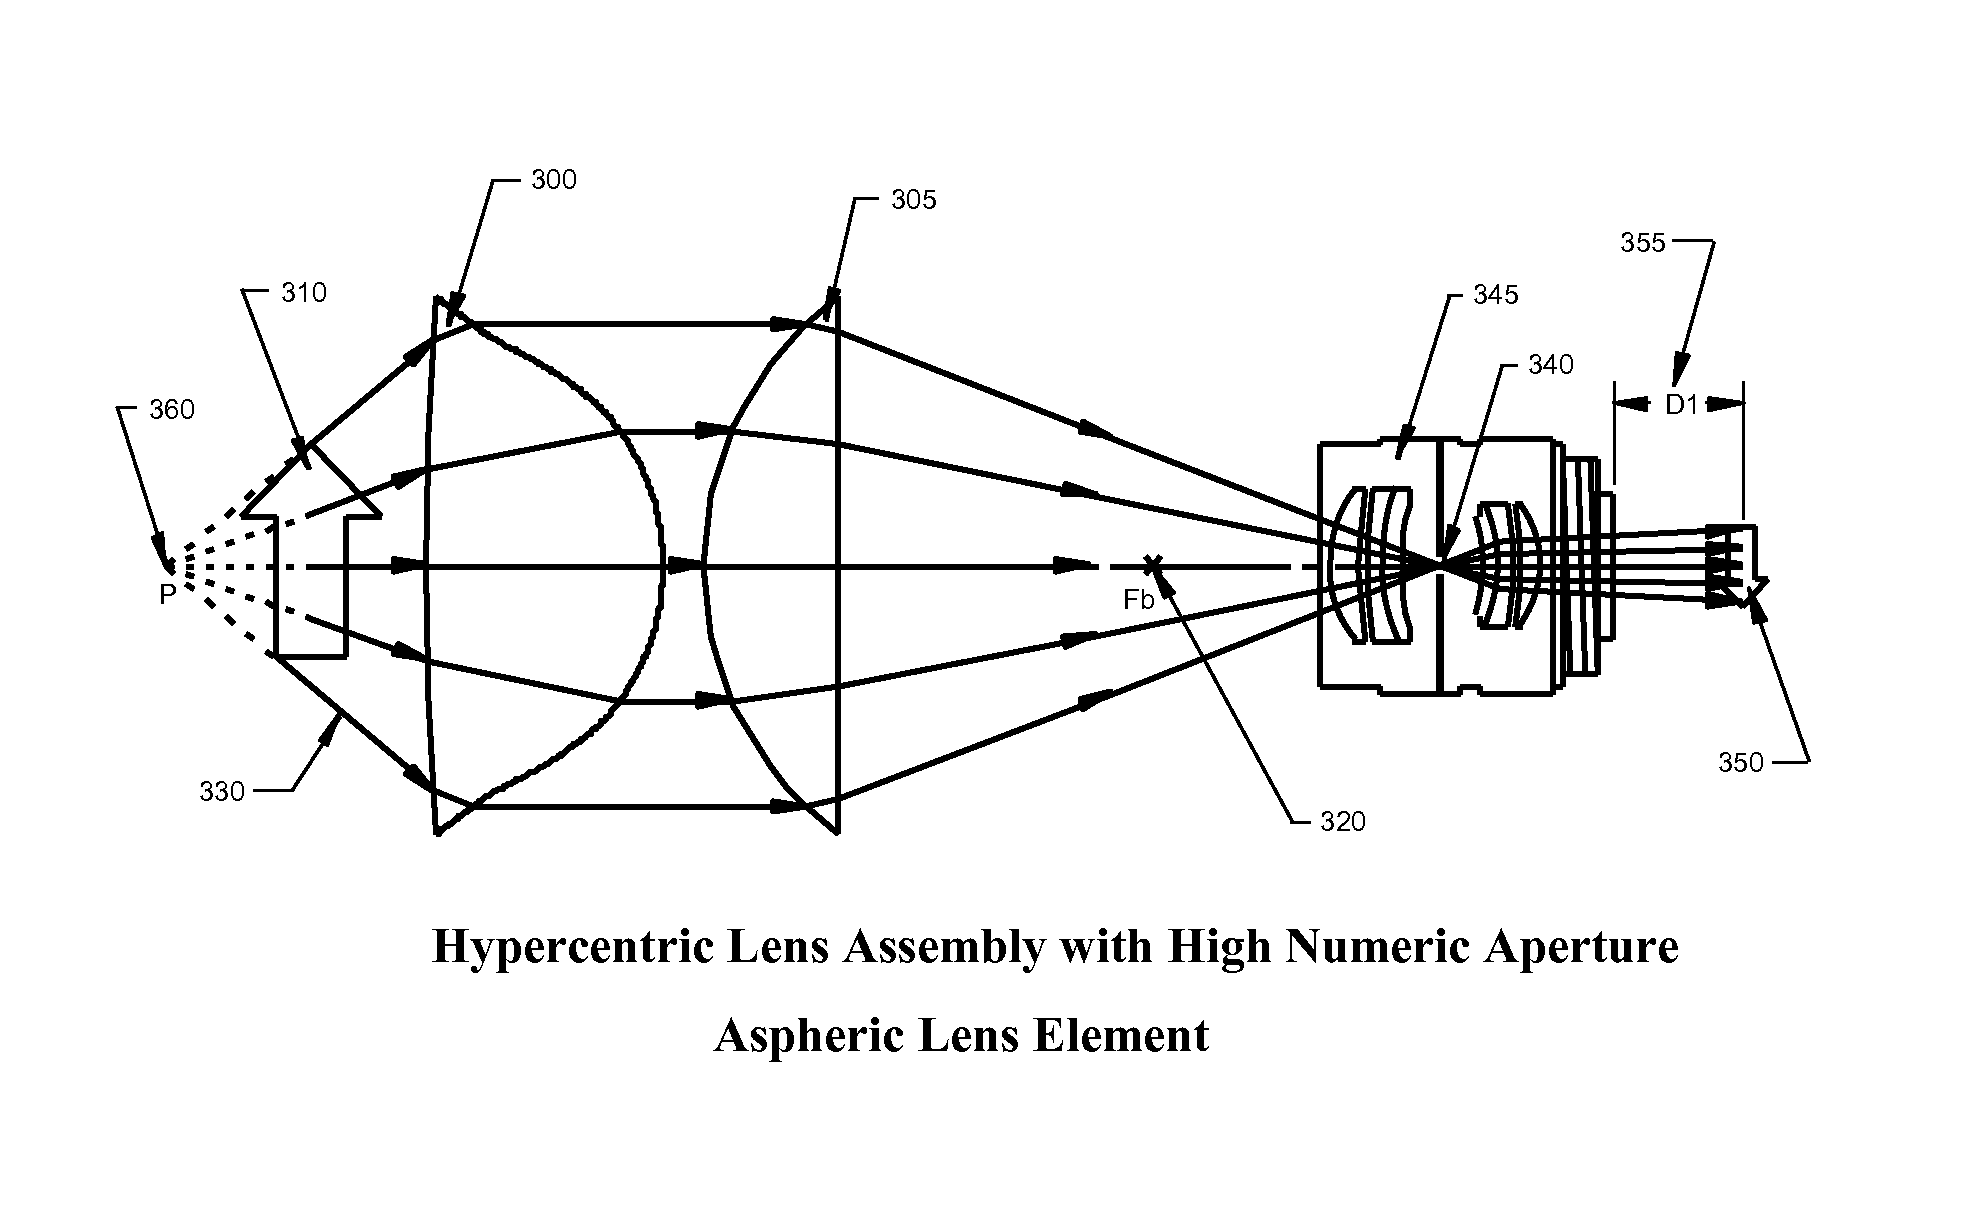 Hypercentric lens assembly with high numeric aperture aspheric element